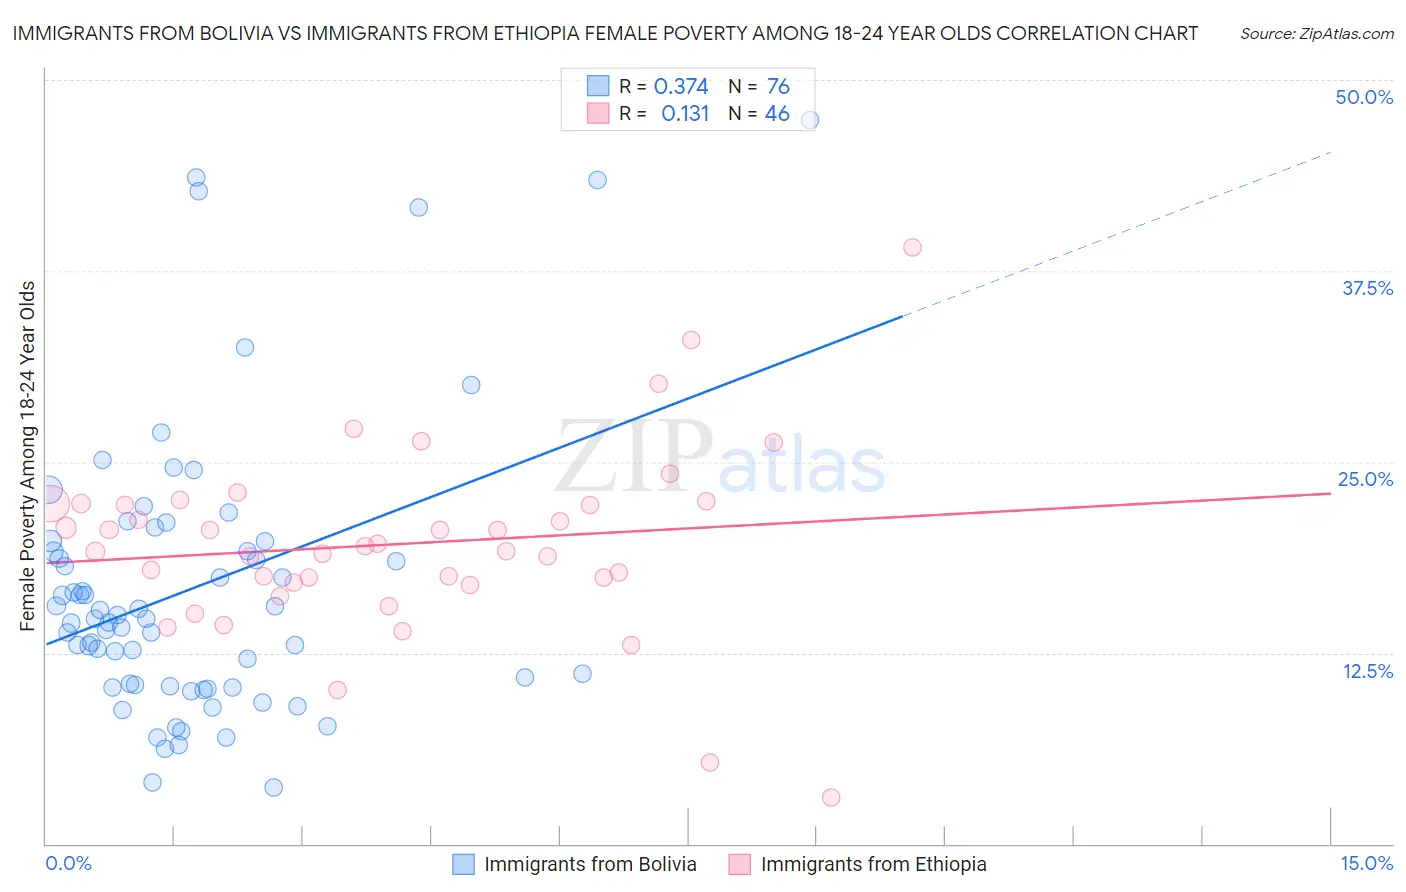 Immigrants from Bolivia vs Immigrants from Ethiopia Female Poverty Among 18-24 Year Olds